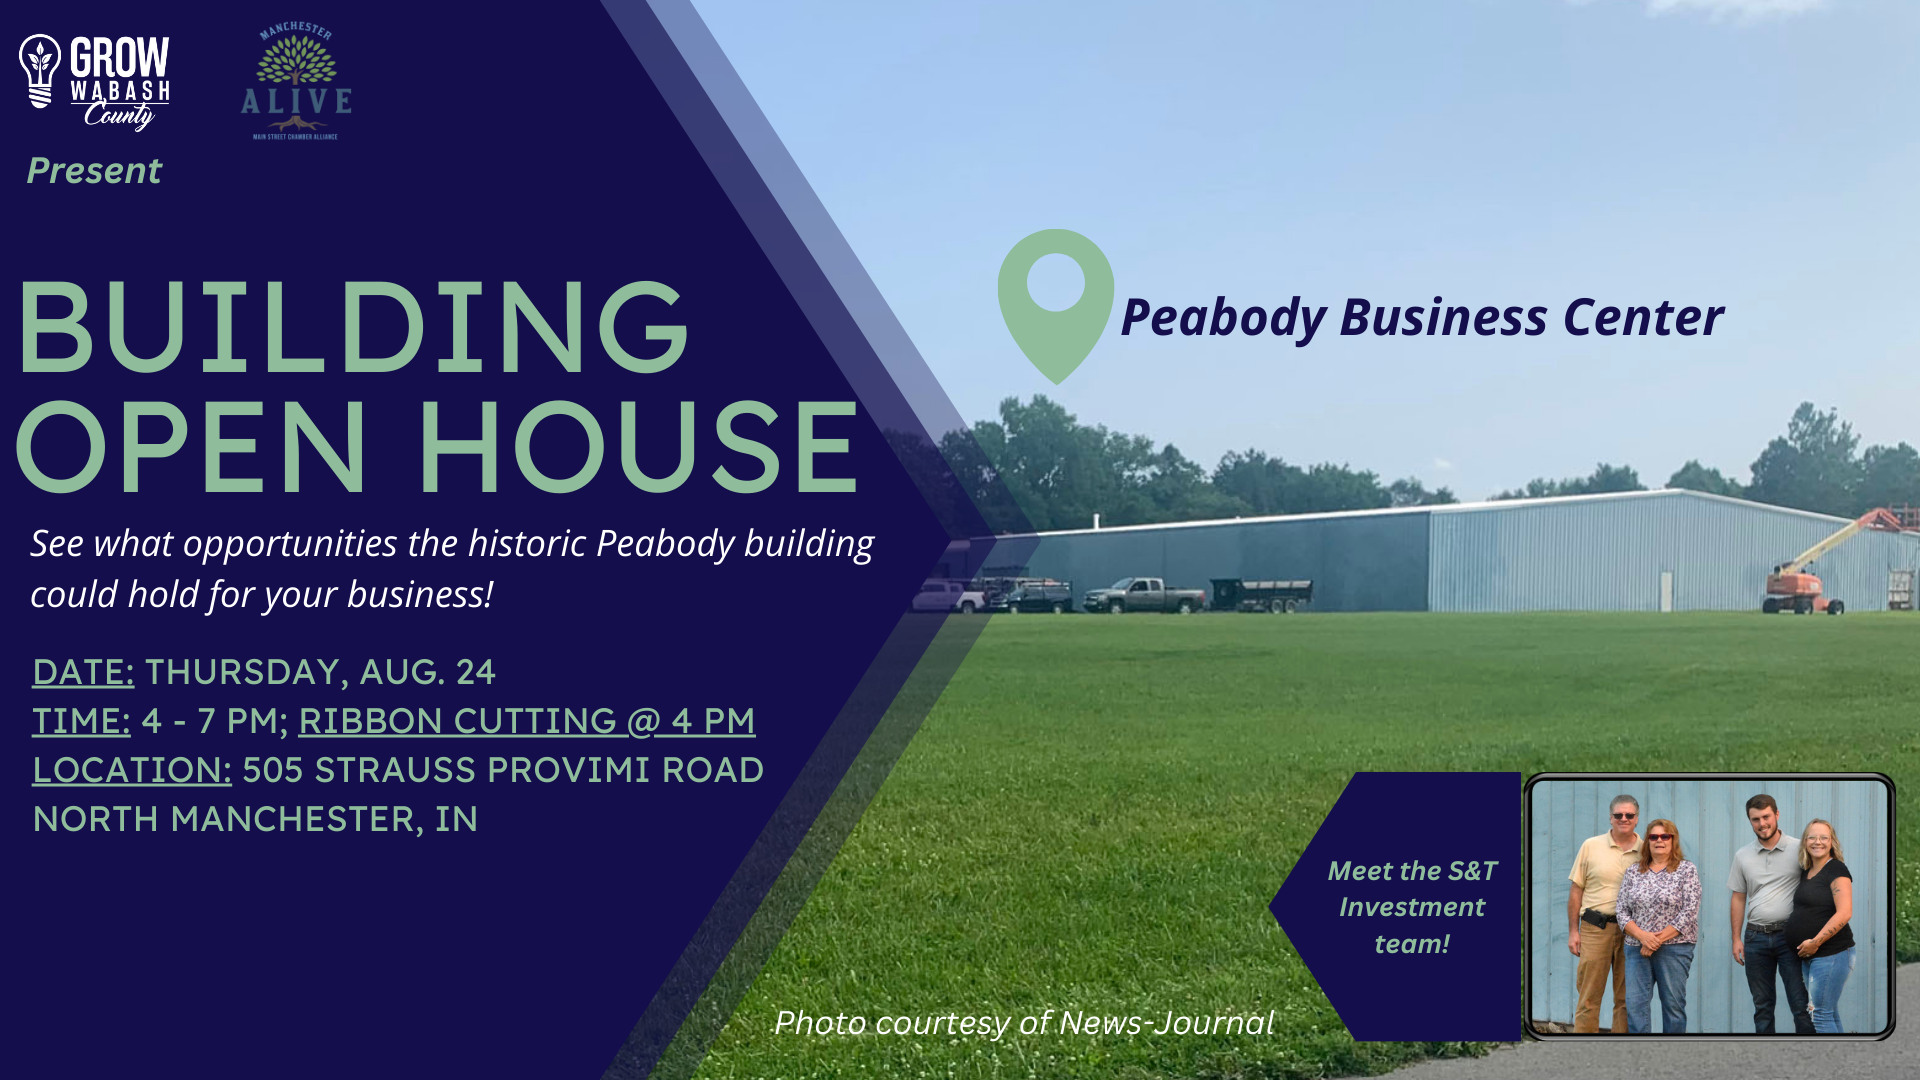 Peabody Building renovation central focus of Aug. 24 open house main photo